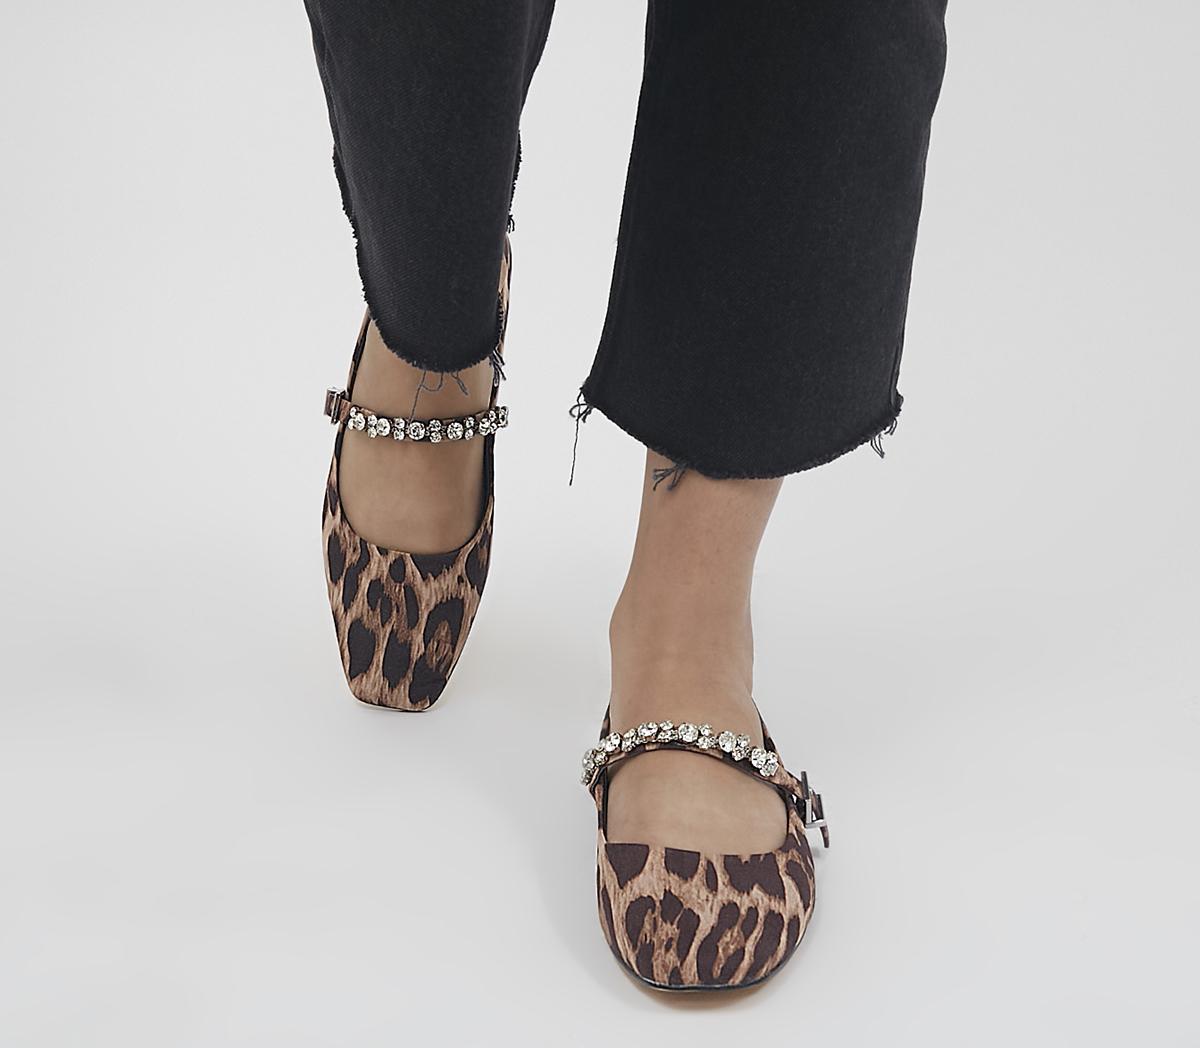 Formerly Soft Square Mary Jane Flats